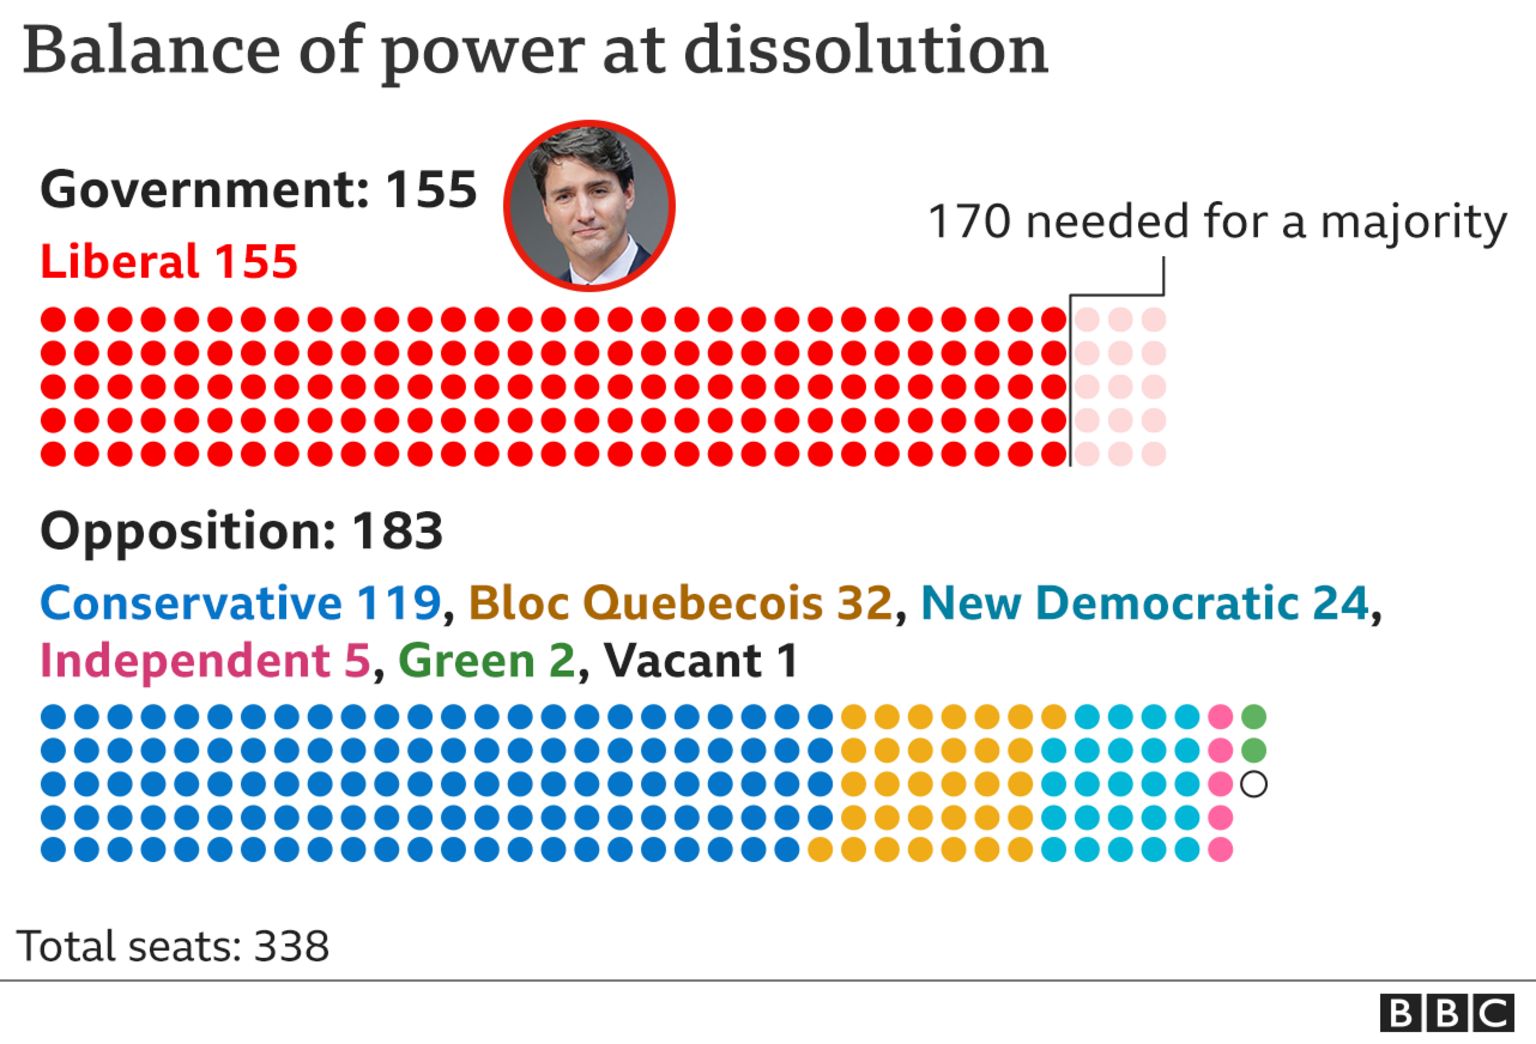 Graphic showing the balance of power at dissolution